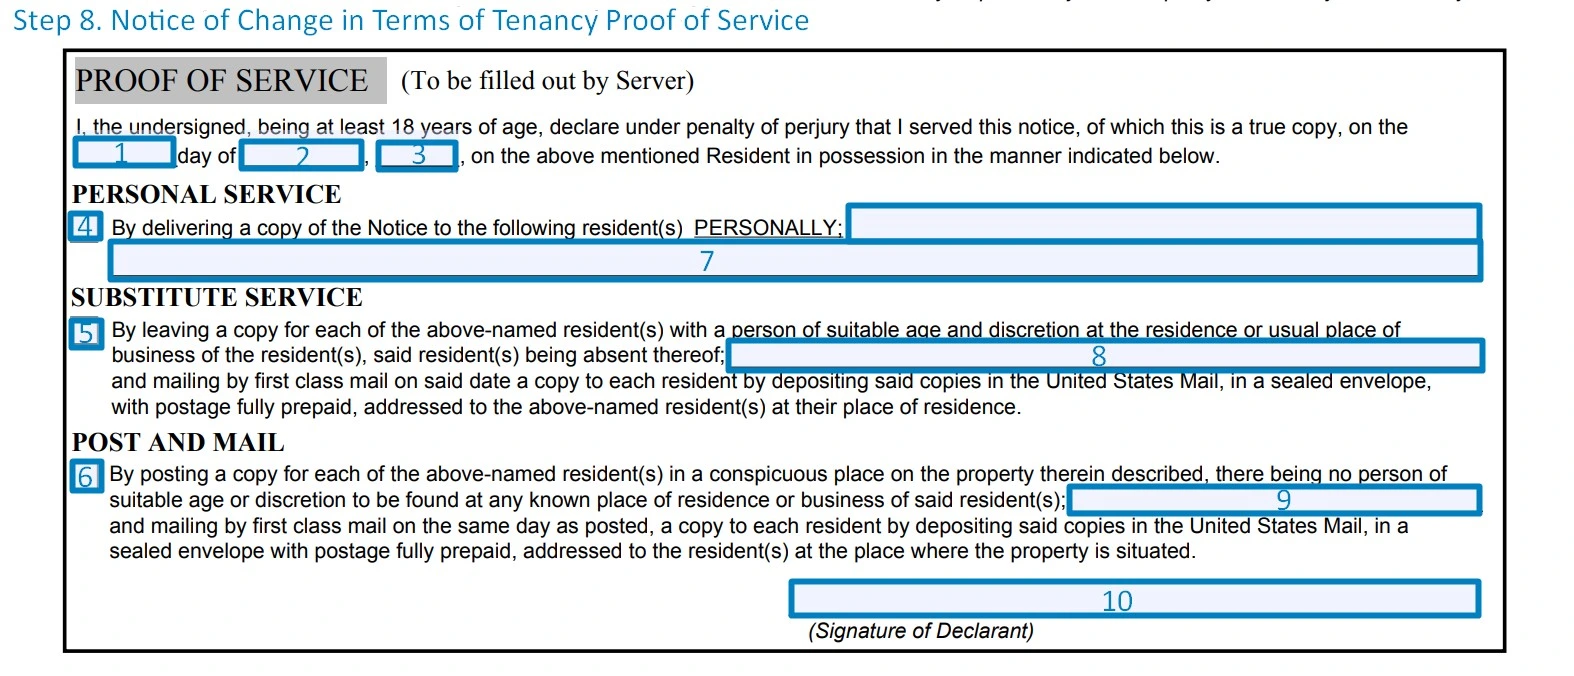 step 8 to filling out a notice of change in terms of tenancy - proof of service